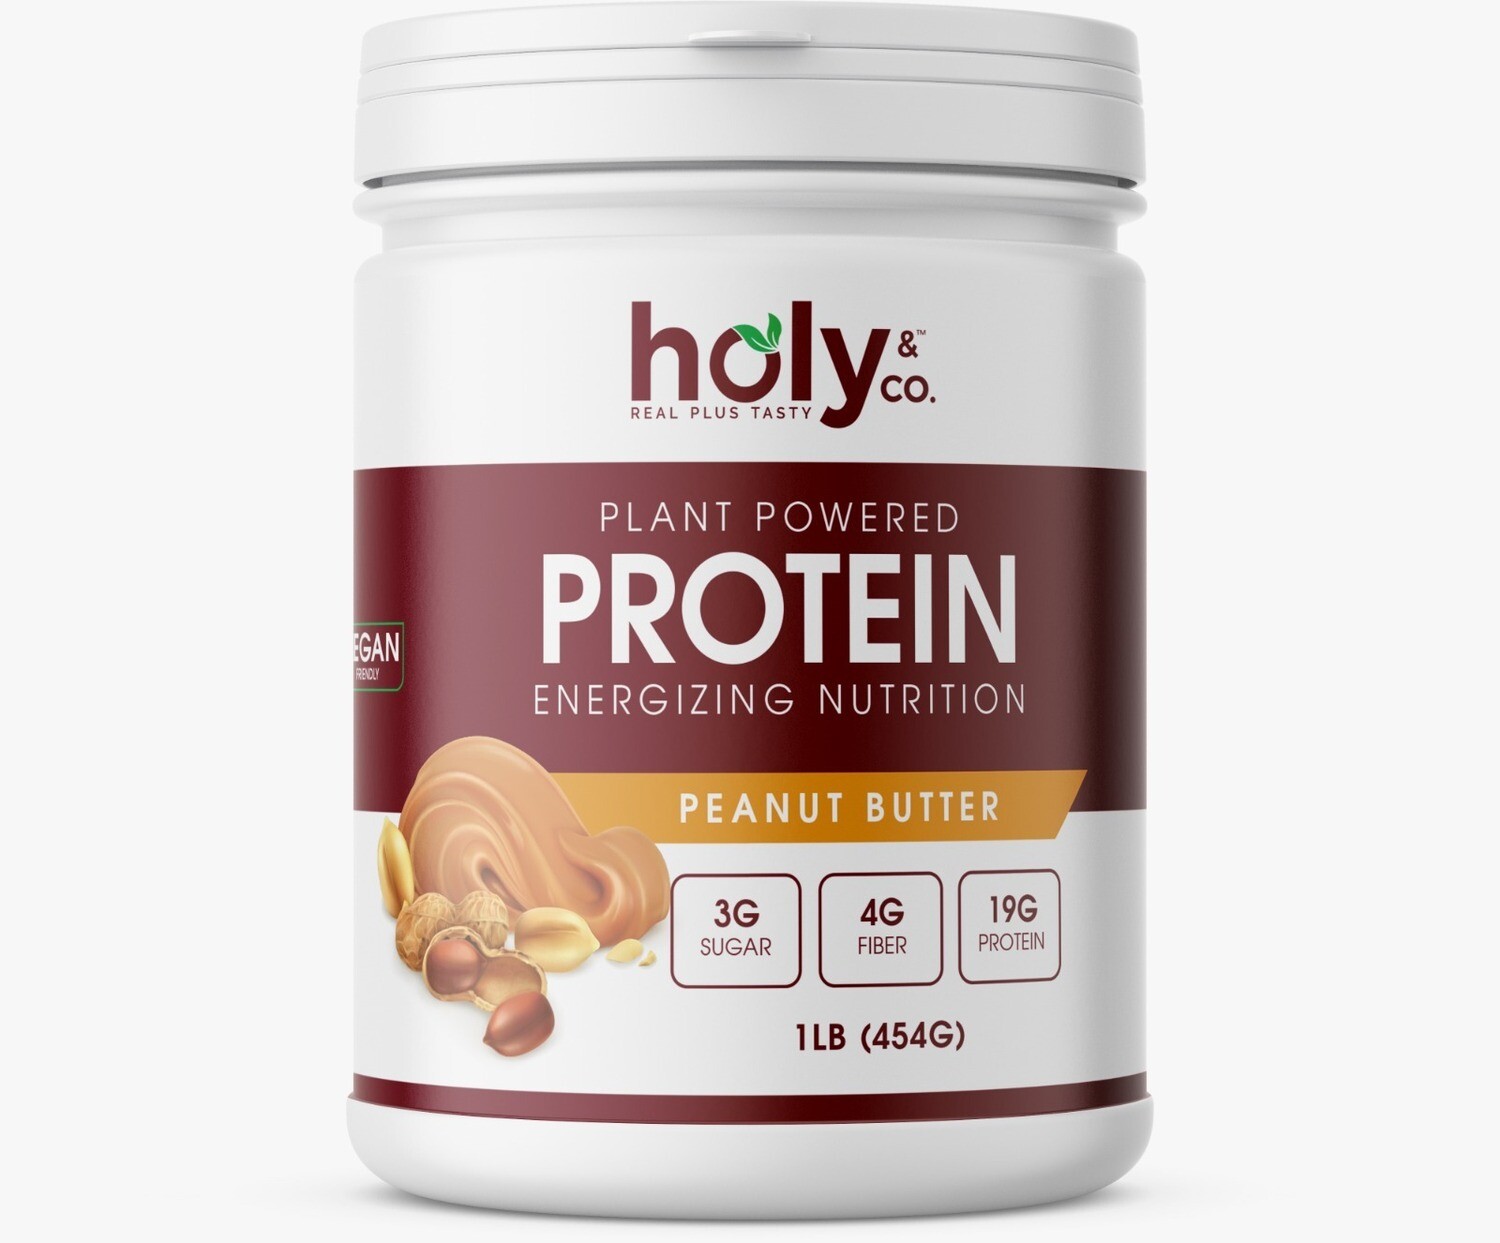 Holy &amp; Co. Kosher Plant Powered Protein, Energizing Nutrition, Peanut Butter Flavor - 1 LB (454g)